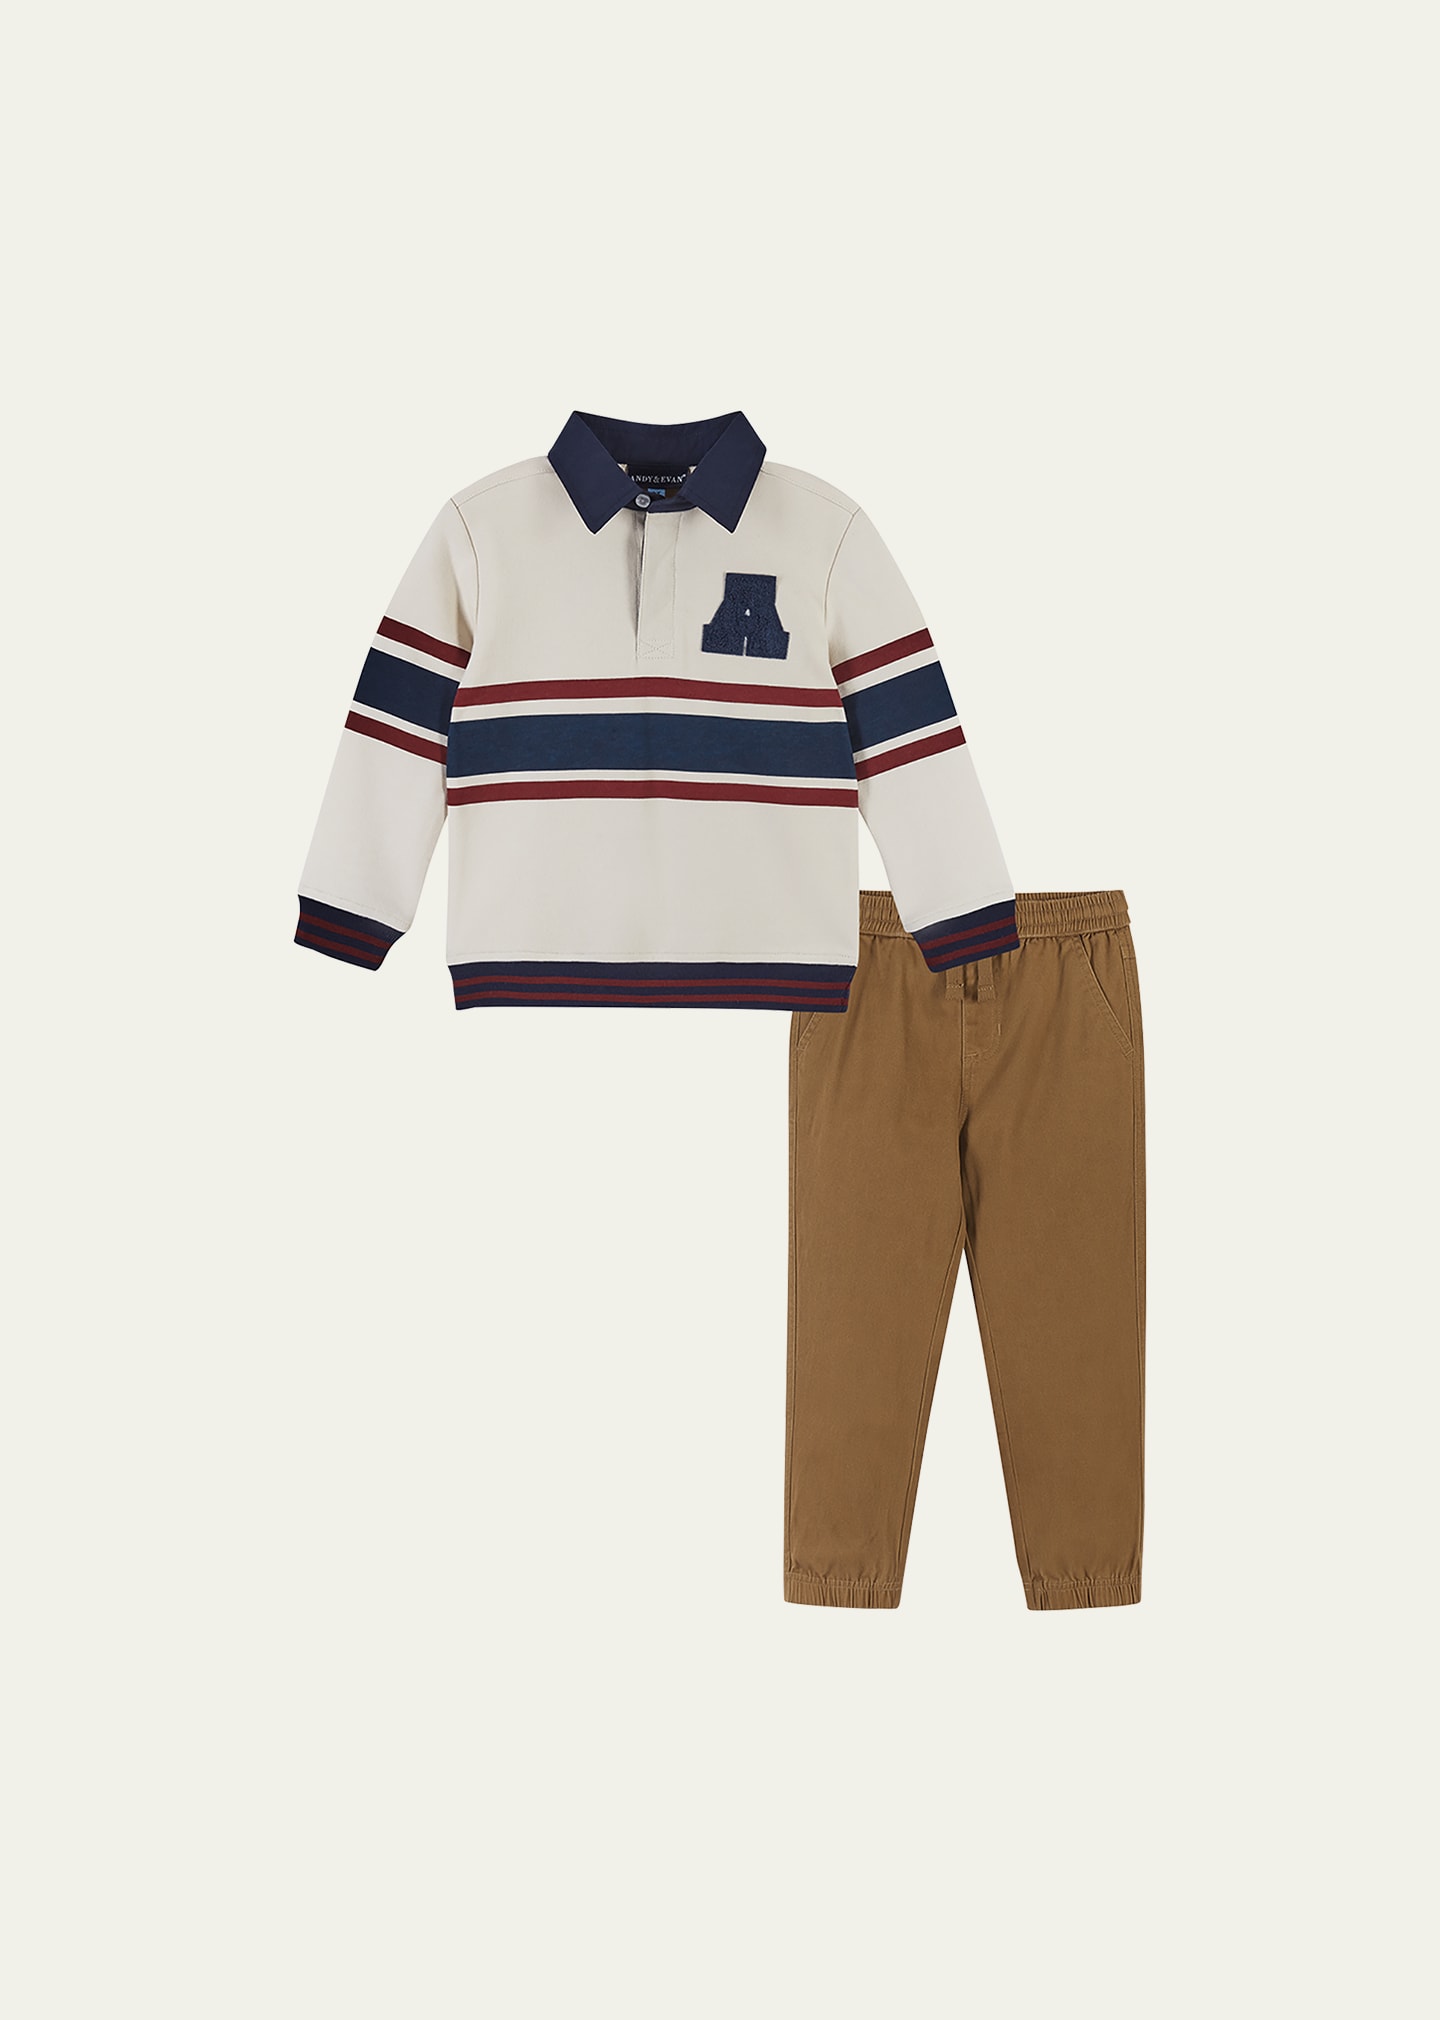 ANDY & EVAN BOY'S TWO-PIECE RUGBY PANTS SET